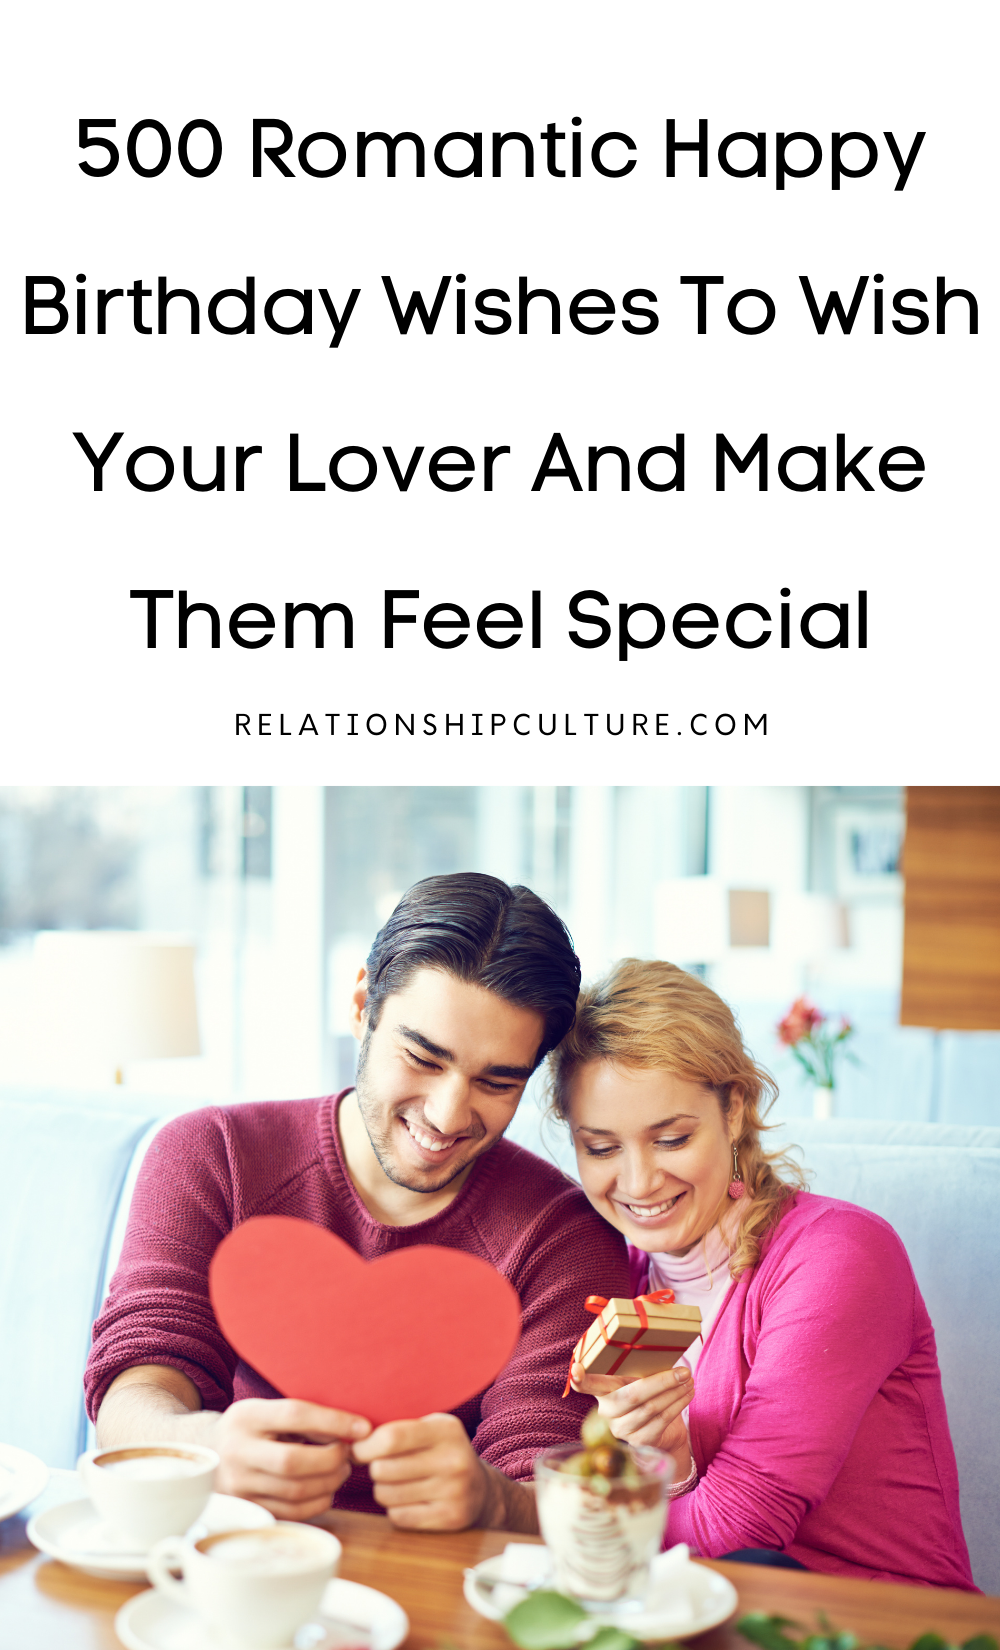 500 Romantic Happy Birthday Wishes To Send Your Lover - Relationship ...